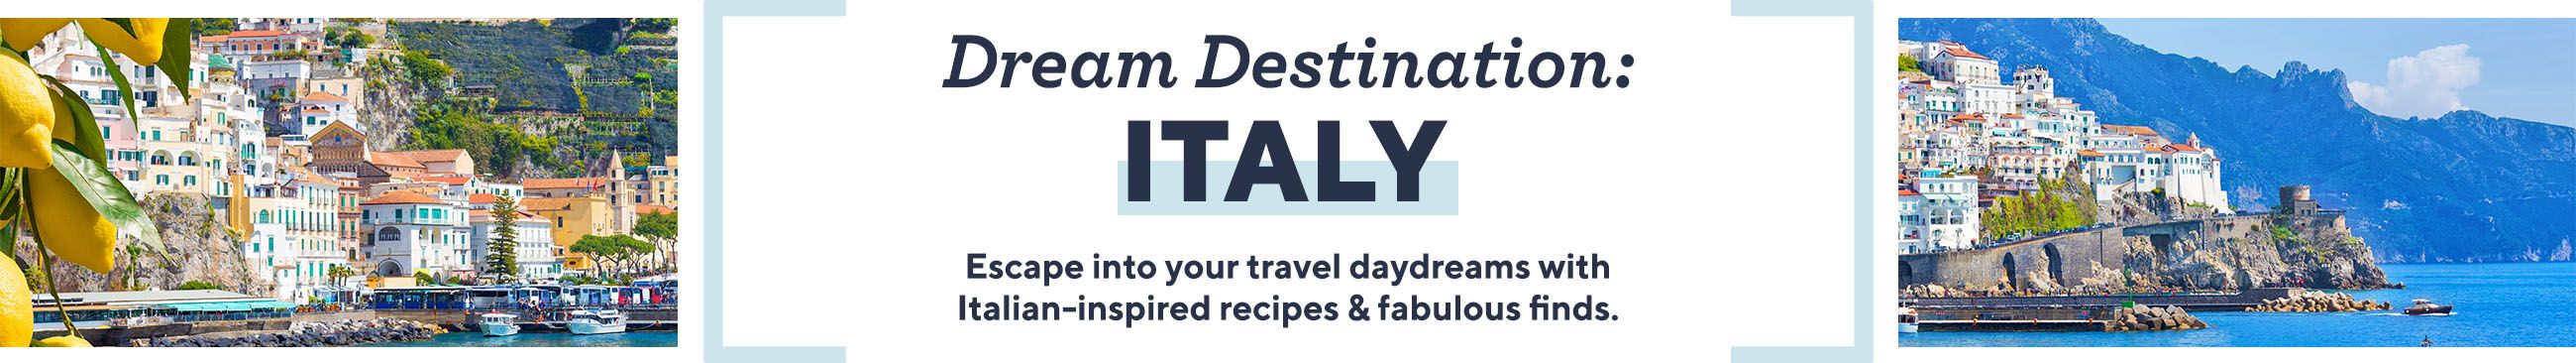 Dream Destination: Italy.  Escape into your travel daydreams with Italian-inspired recipes & fabulous finds